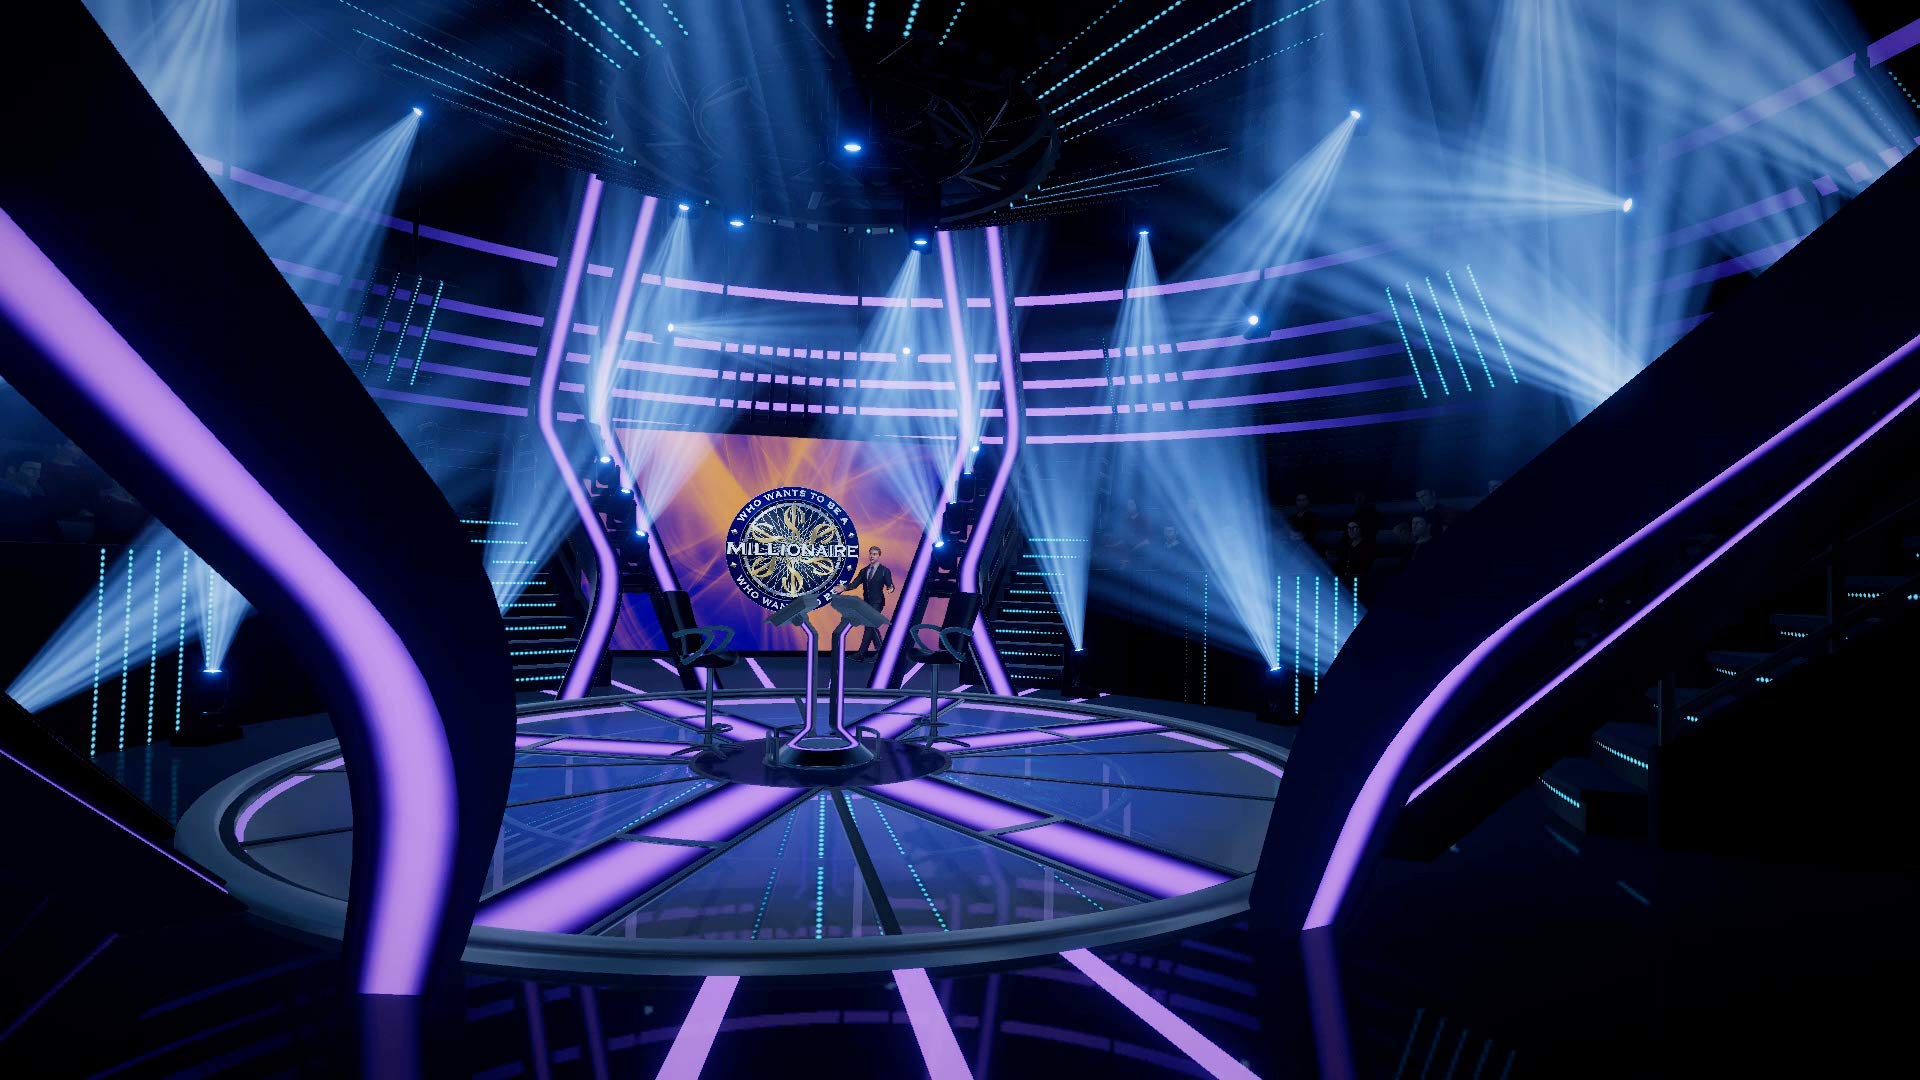 Who Wants to Be A Millionaire (PS4) - PlayStation 4